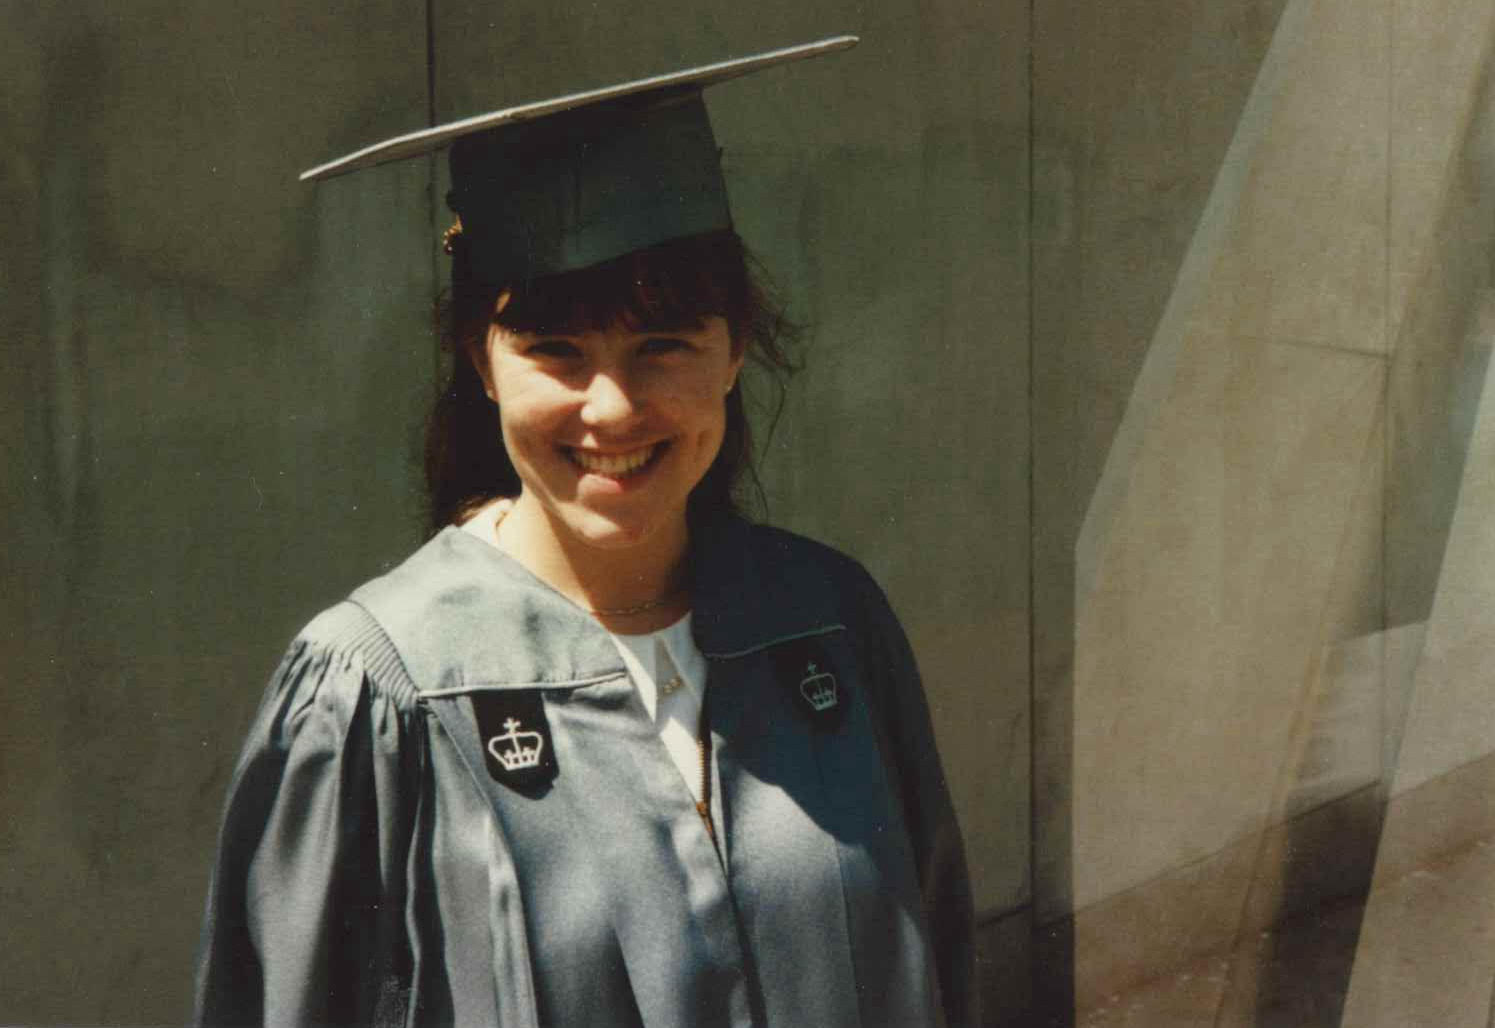 Leonard in 1987 wearing a cap and gown